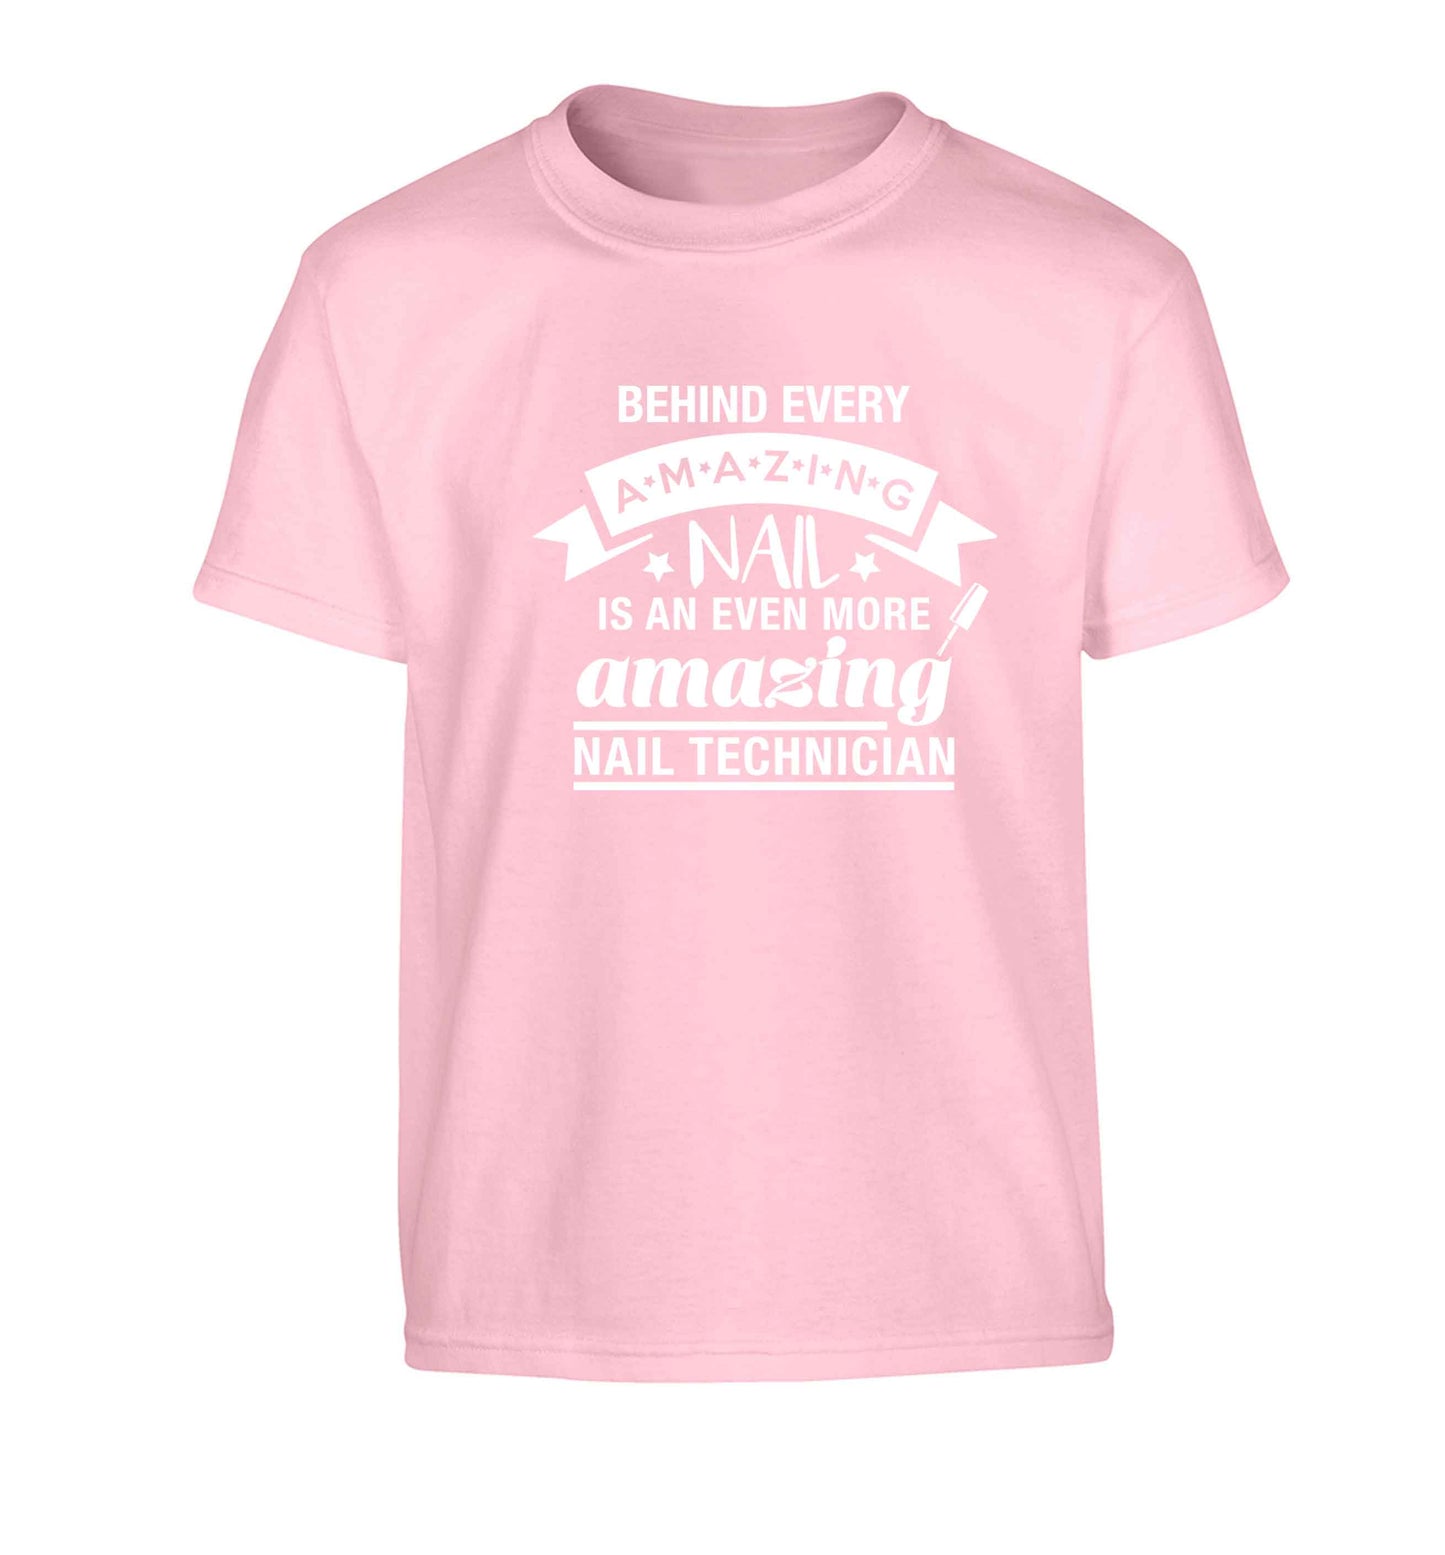 Behind every amazing nail is an even more amazing nail technician Children's light pink Tshirt 12-13 Years